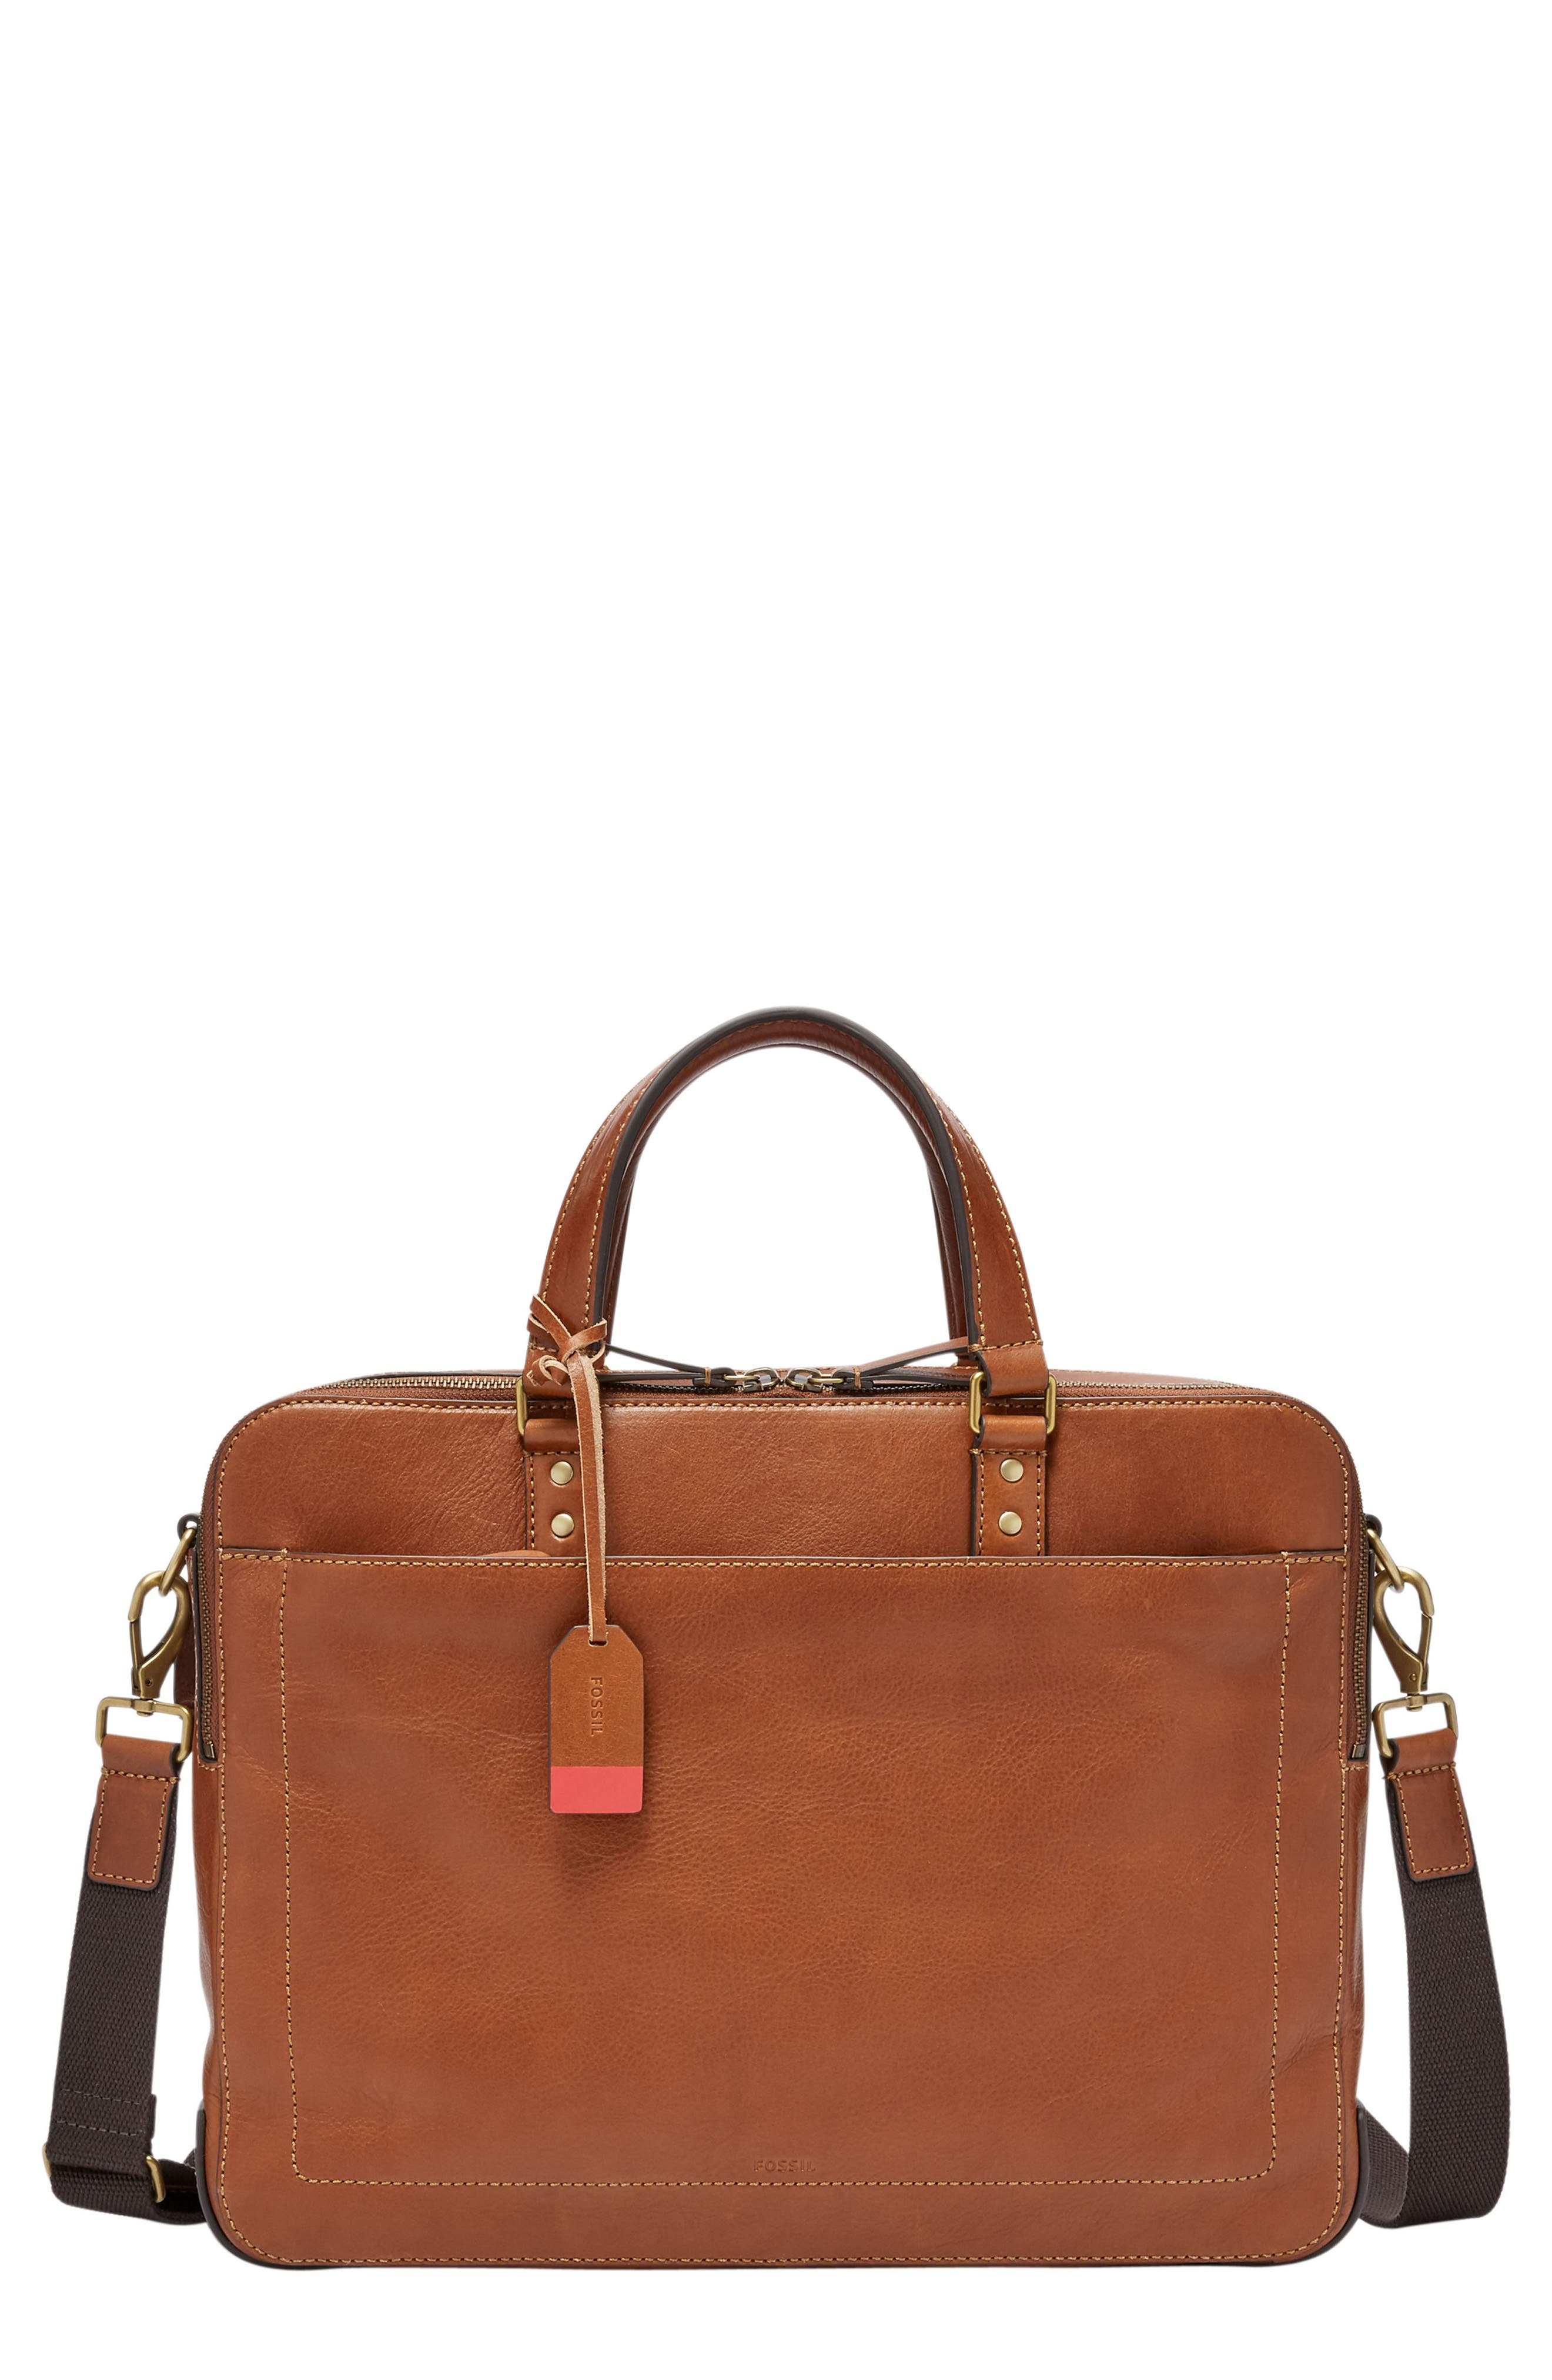 UPC 762346341390 product image for Men's Fossil Defender Leather Briefcase - Brown | upcitemdb.com